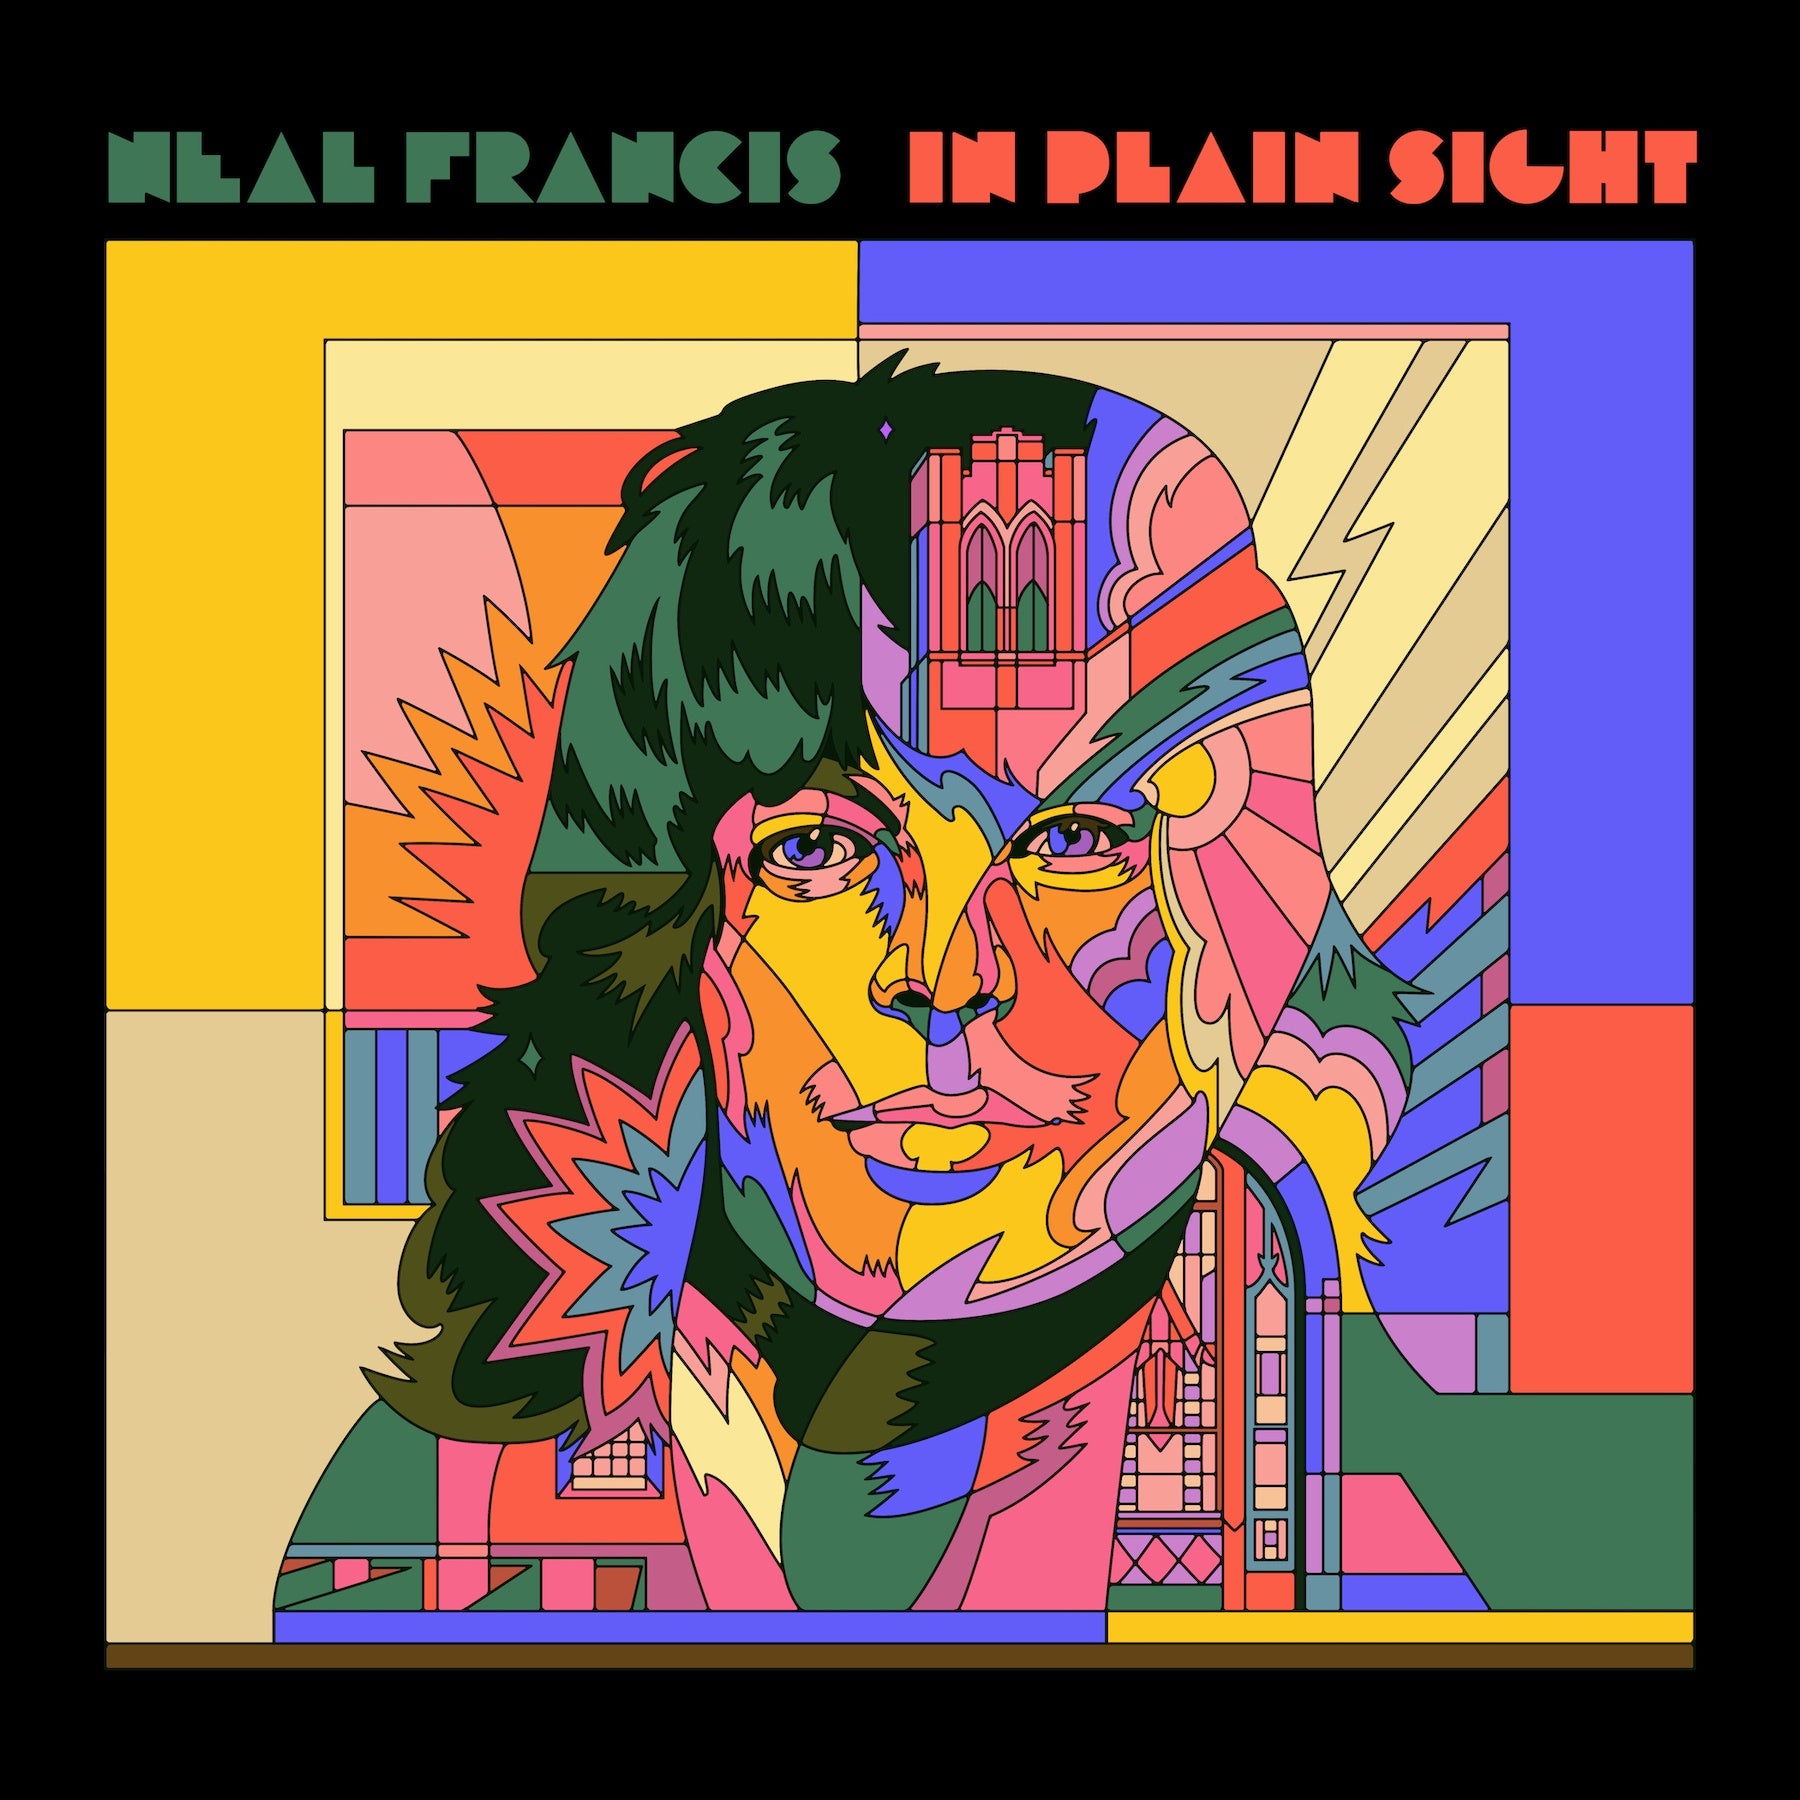 Signed Autographed - Neal Francis - In Plain Sight - New LP Record 2021 ATO USA Electric Teal Vinyl & Download - Chicago Blues Rock / Boogie / Funk